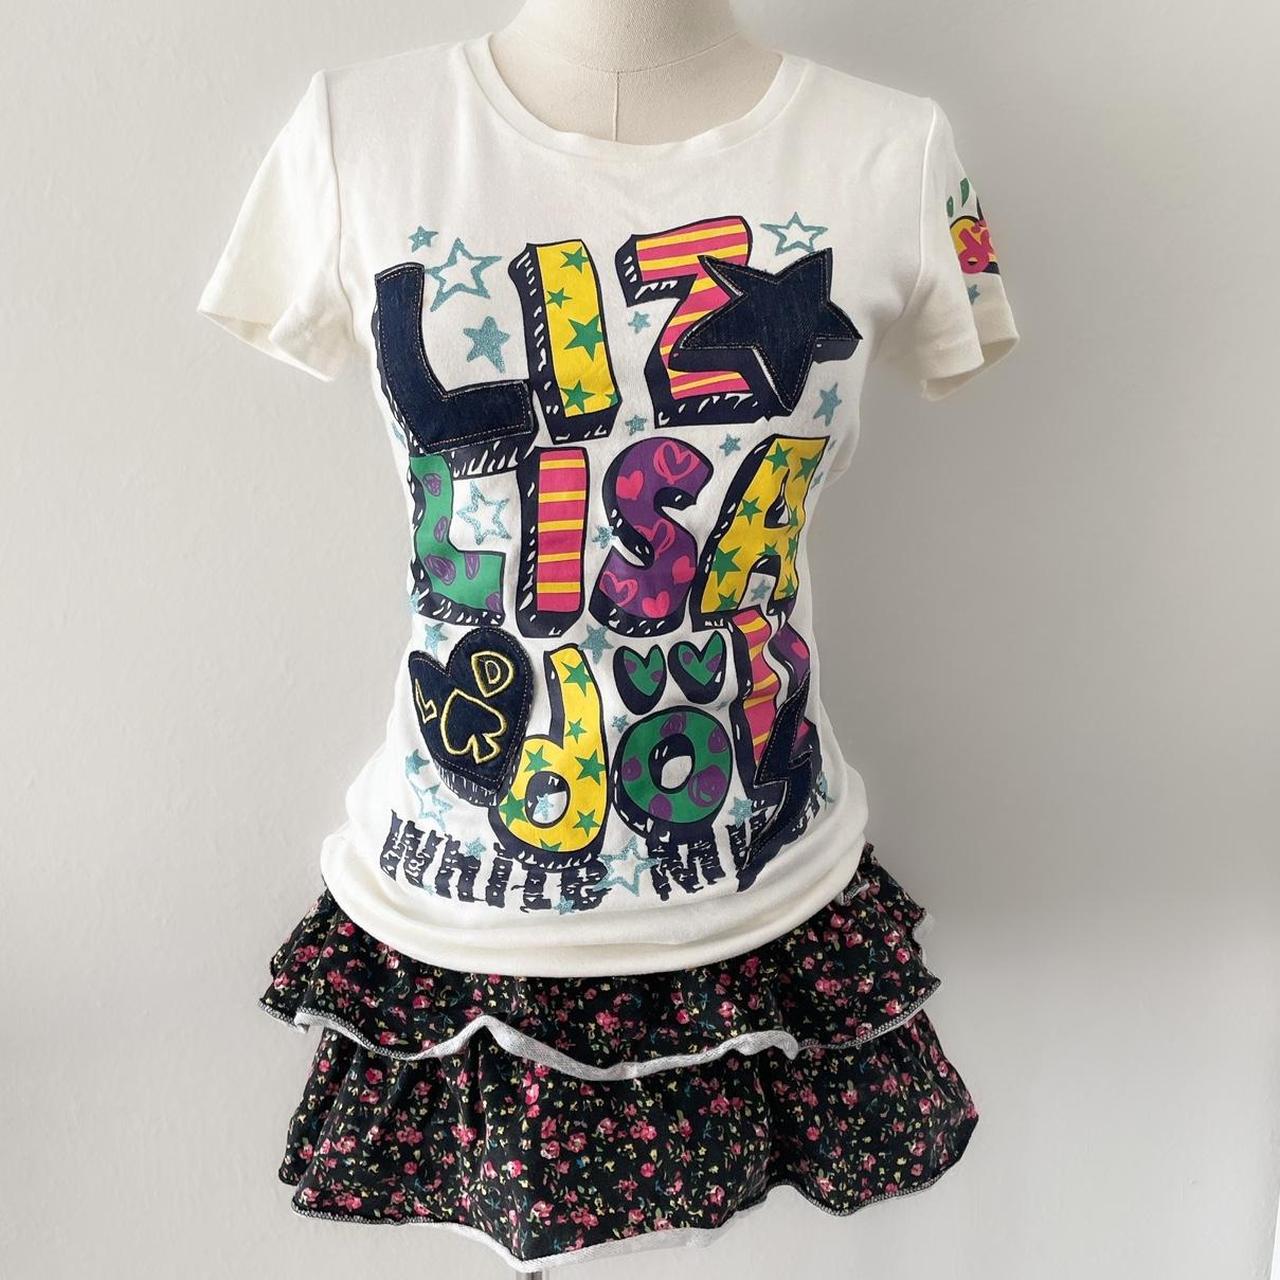 Liz lisa doll white multicolored graphic tee from